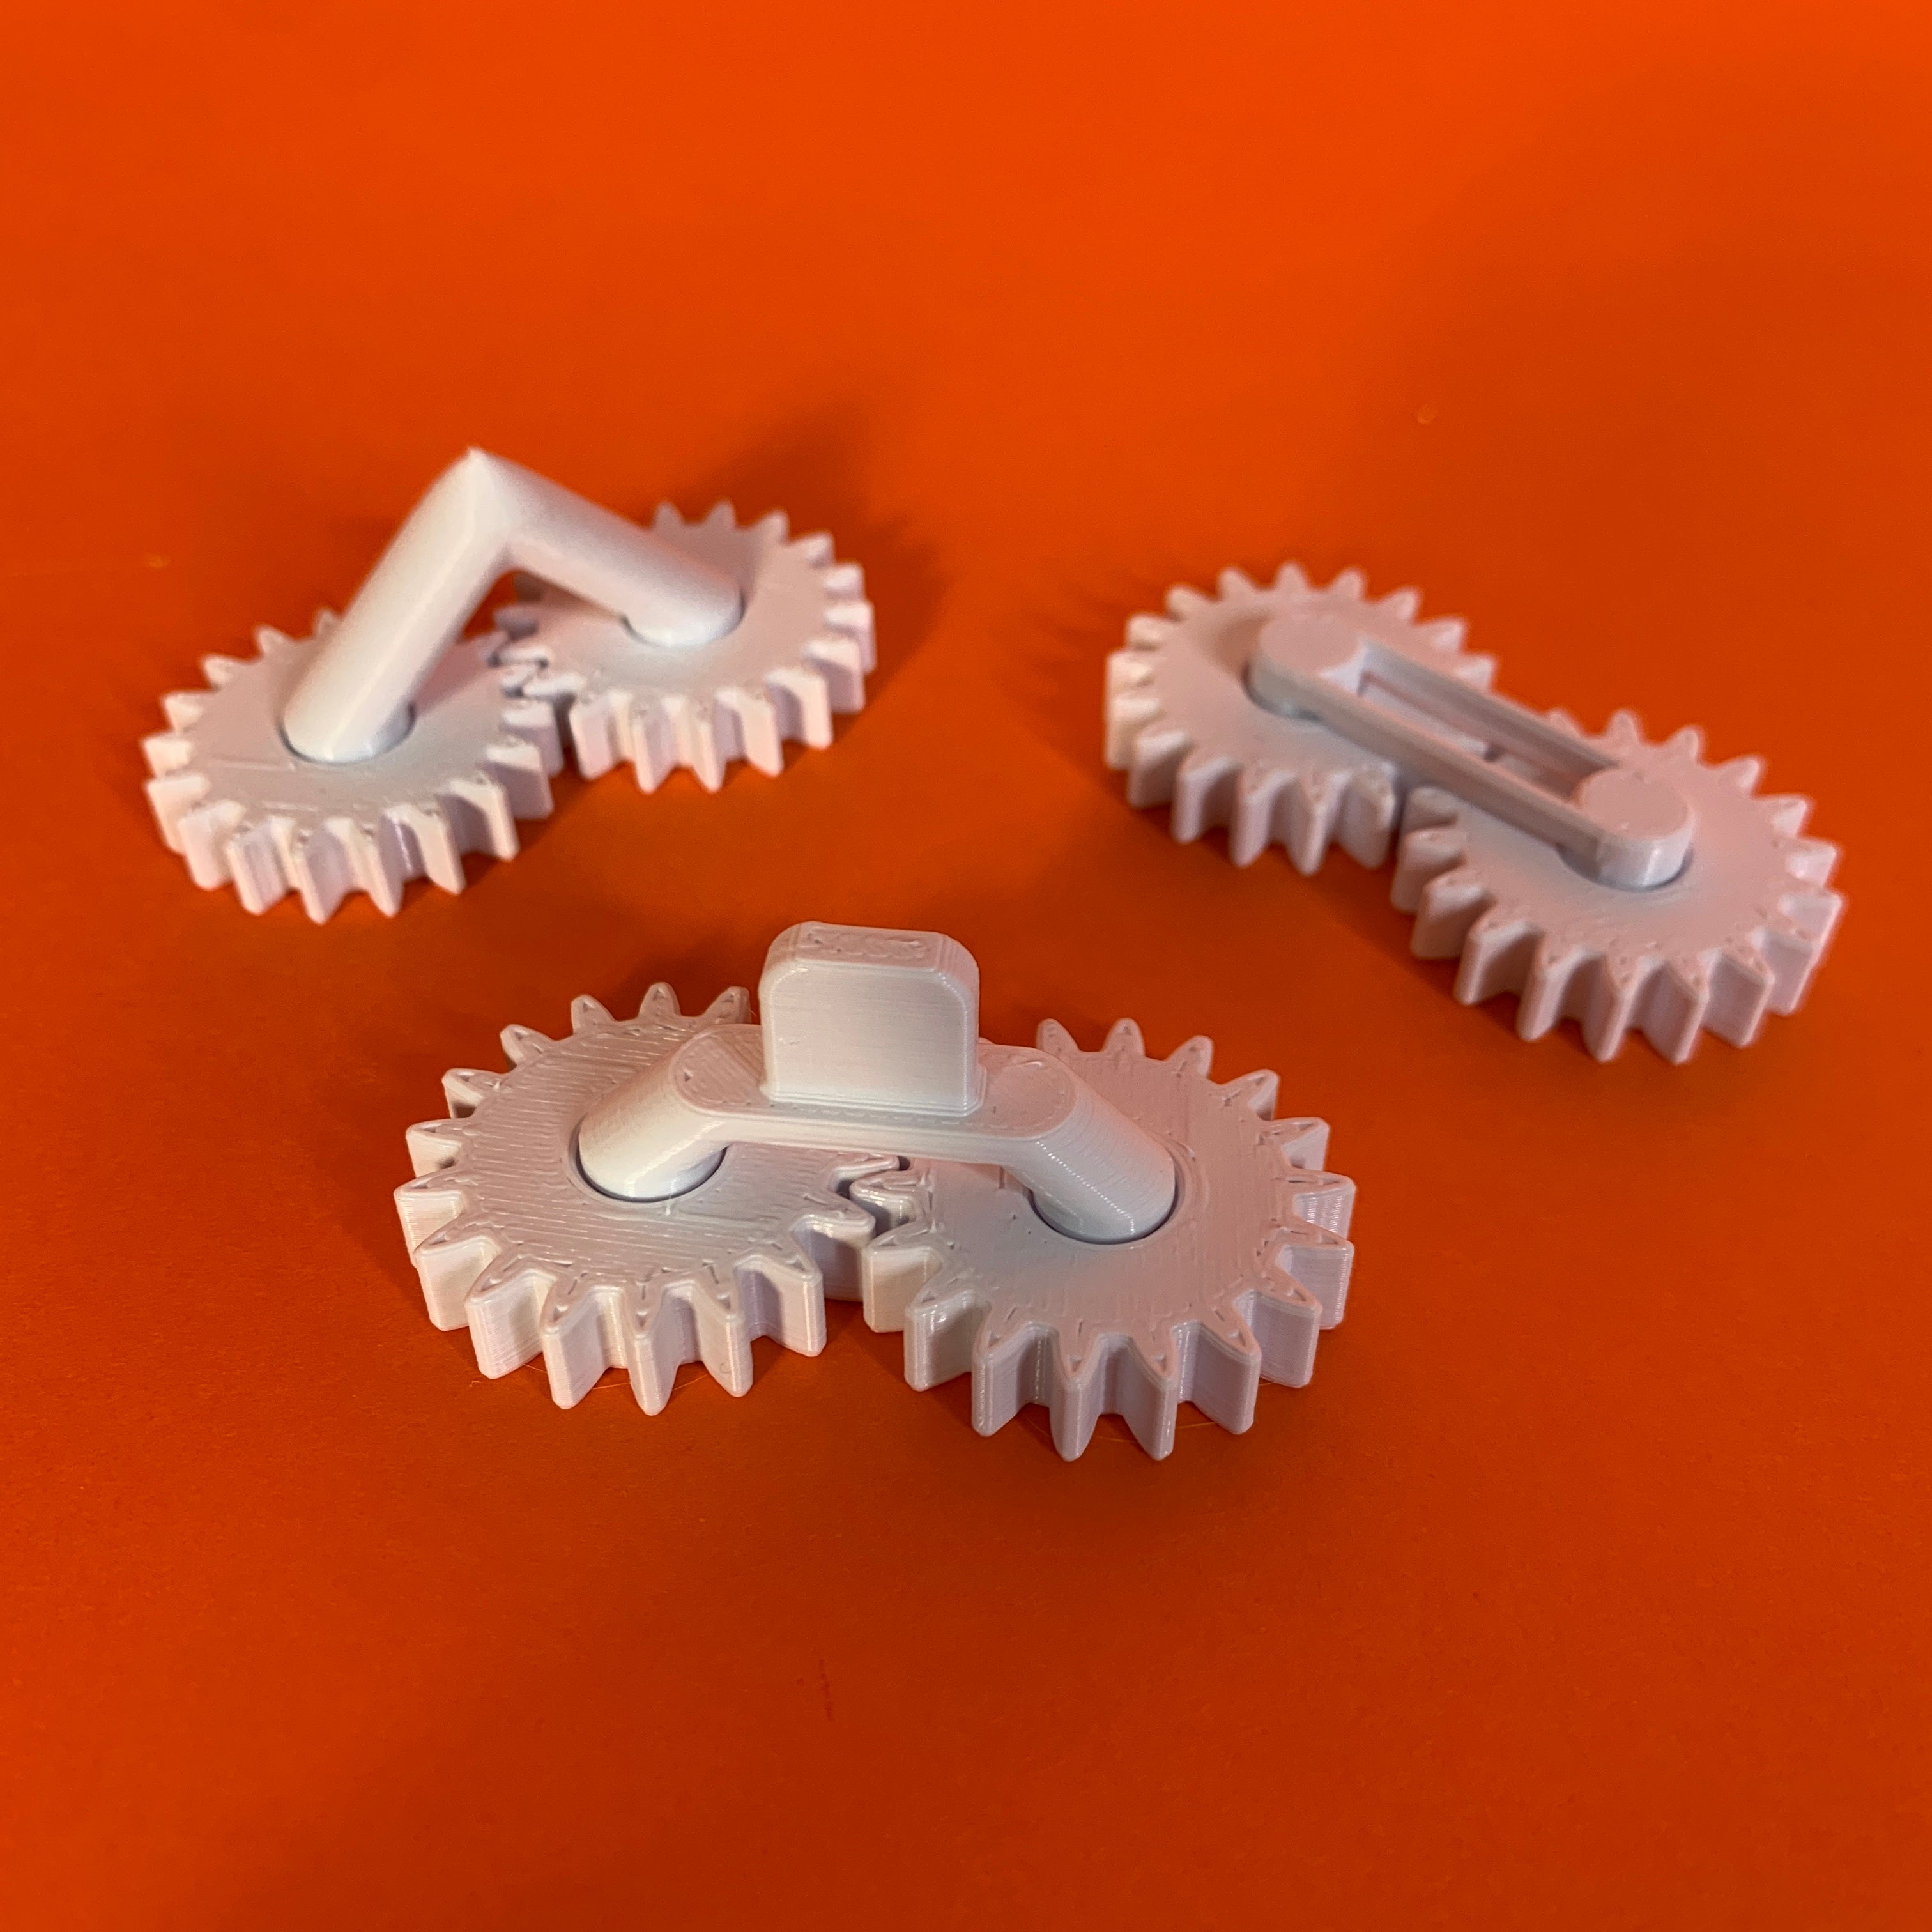 Gear Pair - Print in Place STL